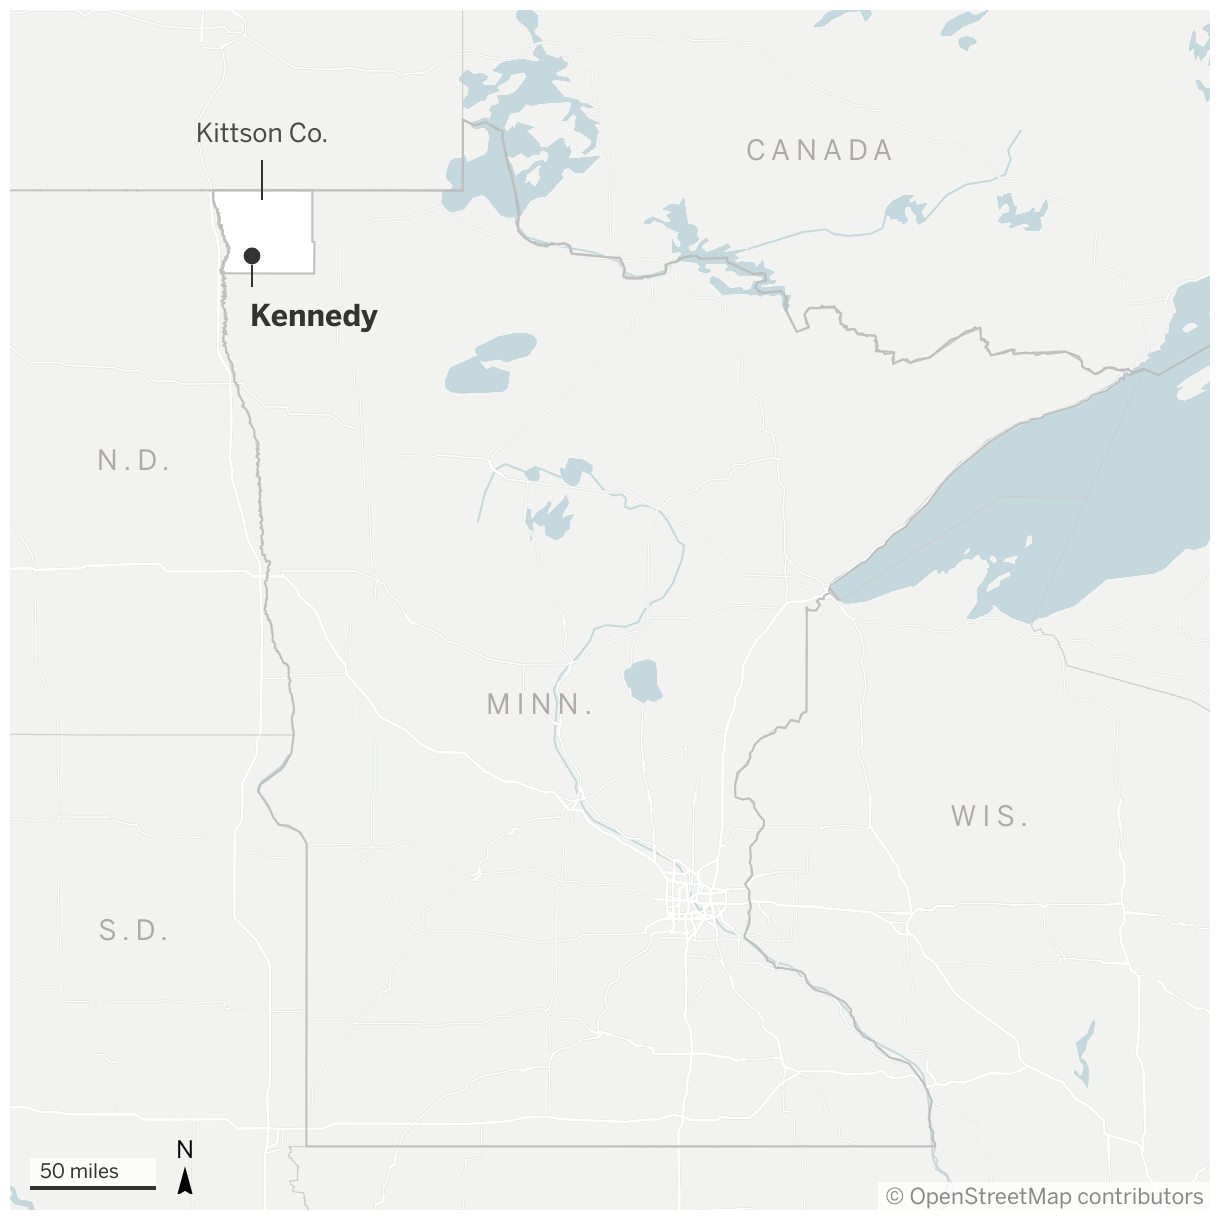 Map of Minnesota highlighting Kittson County and the town of Kennedy in the north-westernmost corner of the state.